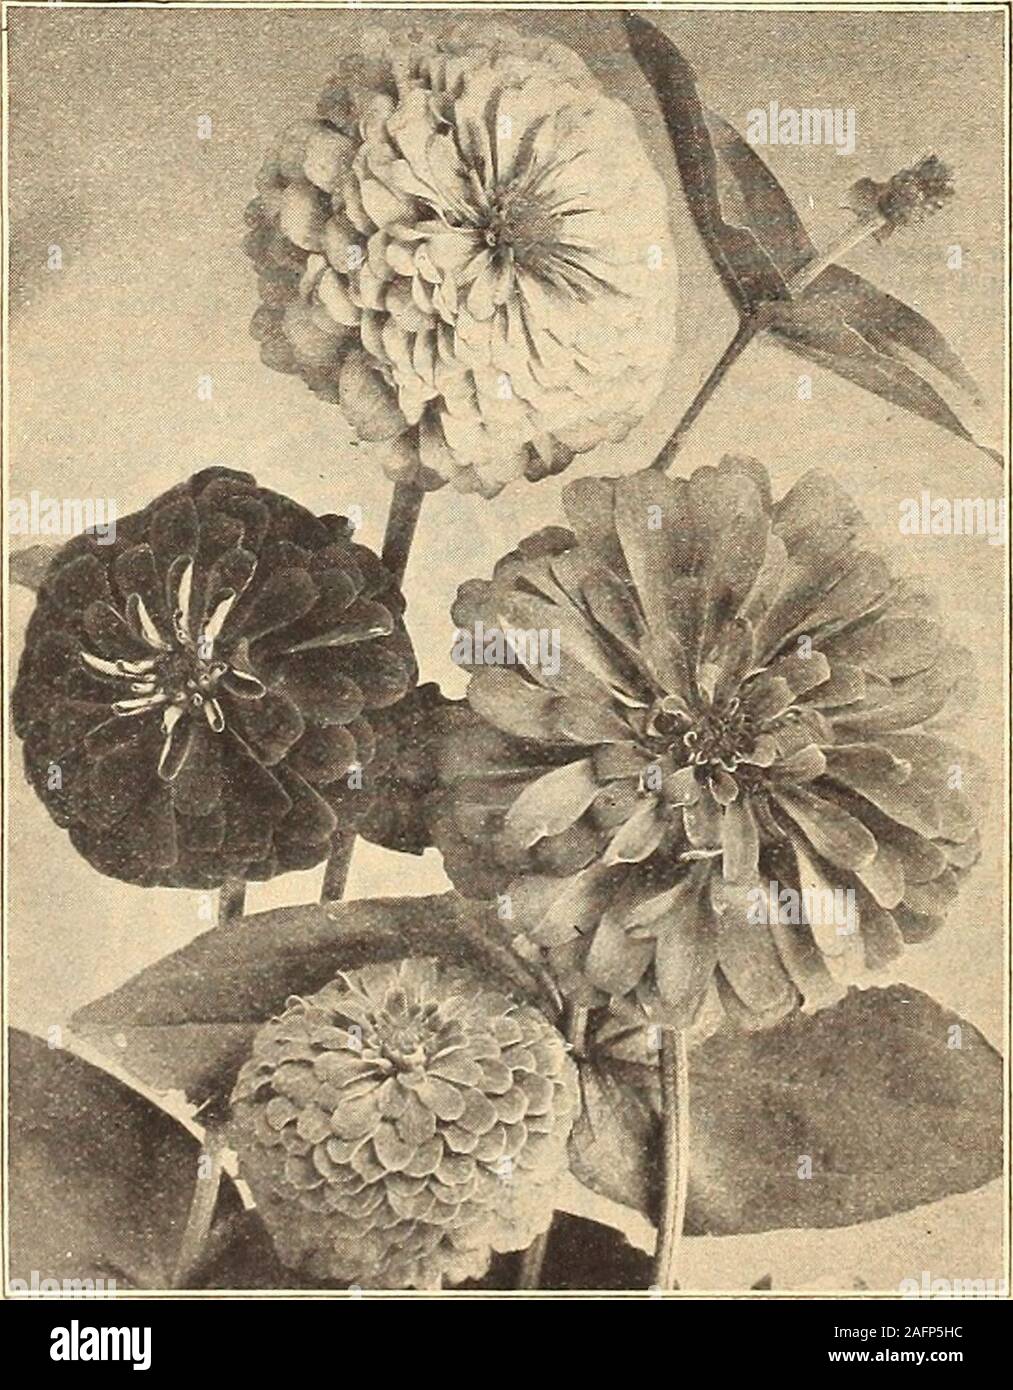 . Currie's farm and garden annual : spring 1916. curries mammoth verbena. WALLFLOWER, A plant much esteemed for its rich, fragrant flowers. H. H. P. Pkt. 10 LAItGE FLOWERING ZINNIA. Double—Finest Mixed 10 Single—Mixed Blood Red—Single 5 Belvoir Castle—Beautiful single, yellow. Annual Wallflower—An annual variety of the old garden favor-ites, which if sown in spring can be had in flower by July.The flowers have all the rich fragrance of the old sorts. Mixed colors ZEA 3IAIZE—Striped Japanese Corn.An ornamental species of corn, the leaves being beautifully striped with white and green. H. H. A. Stock Photo